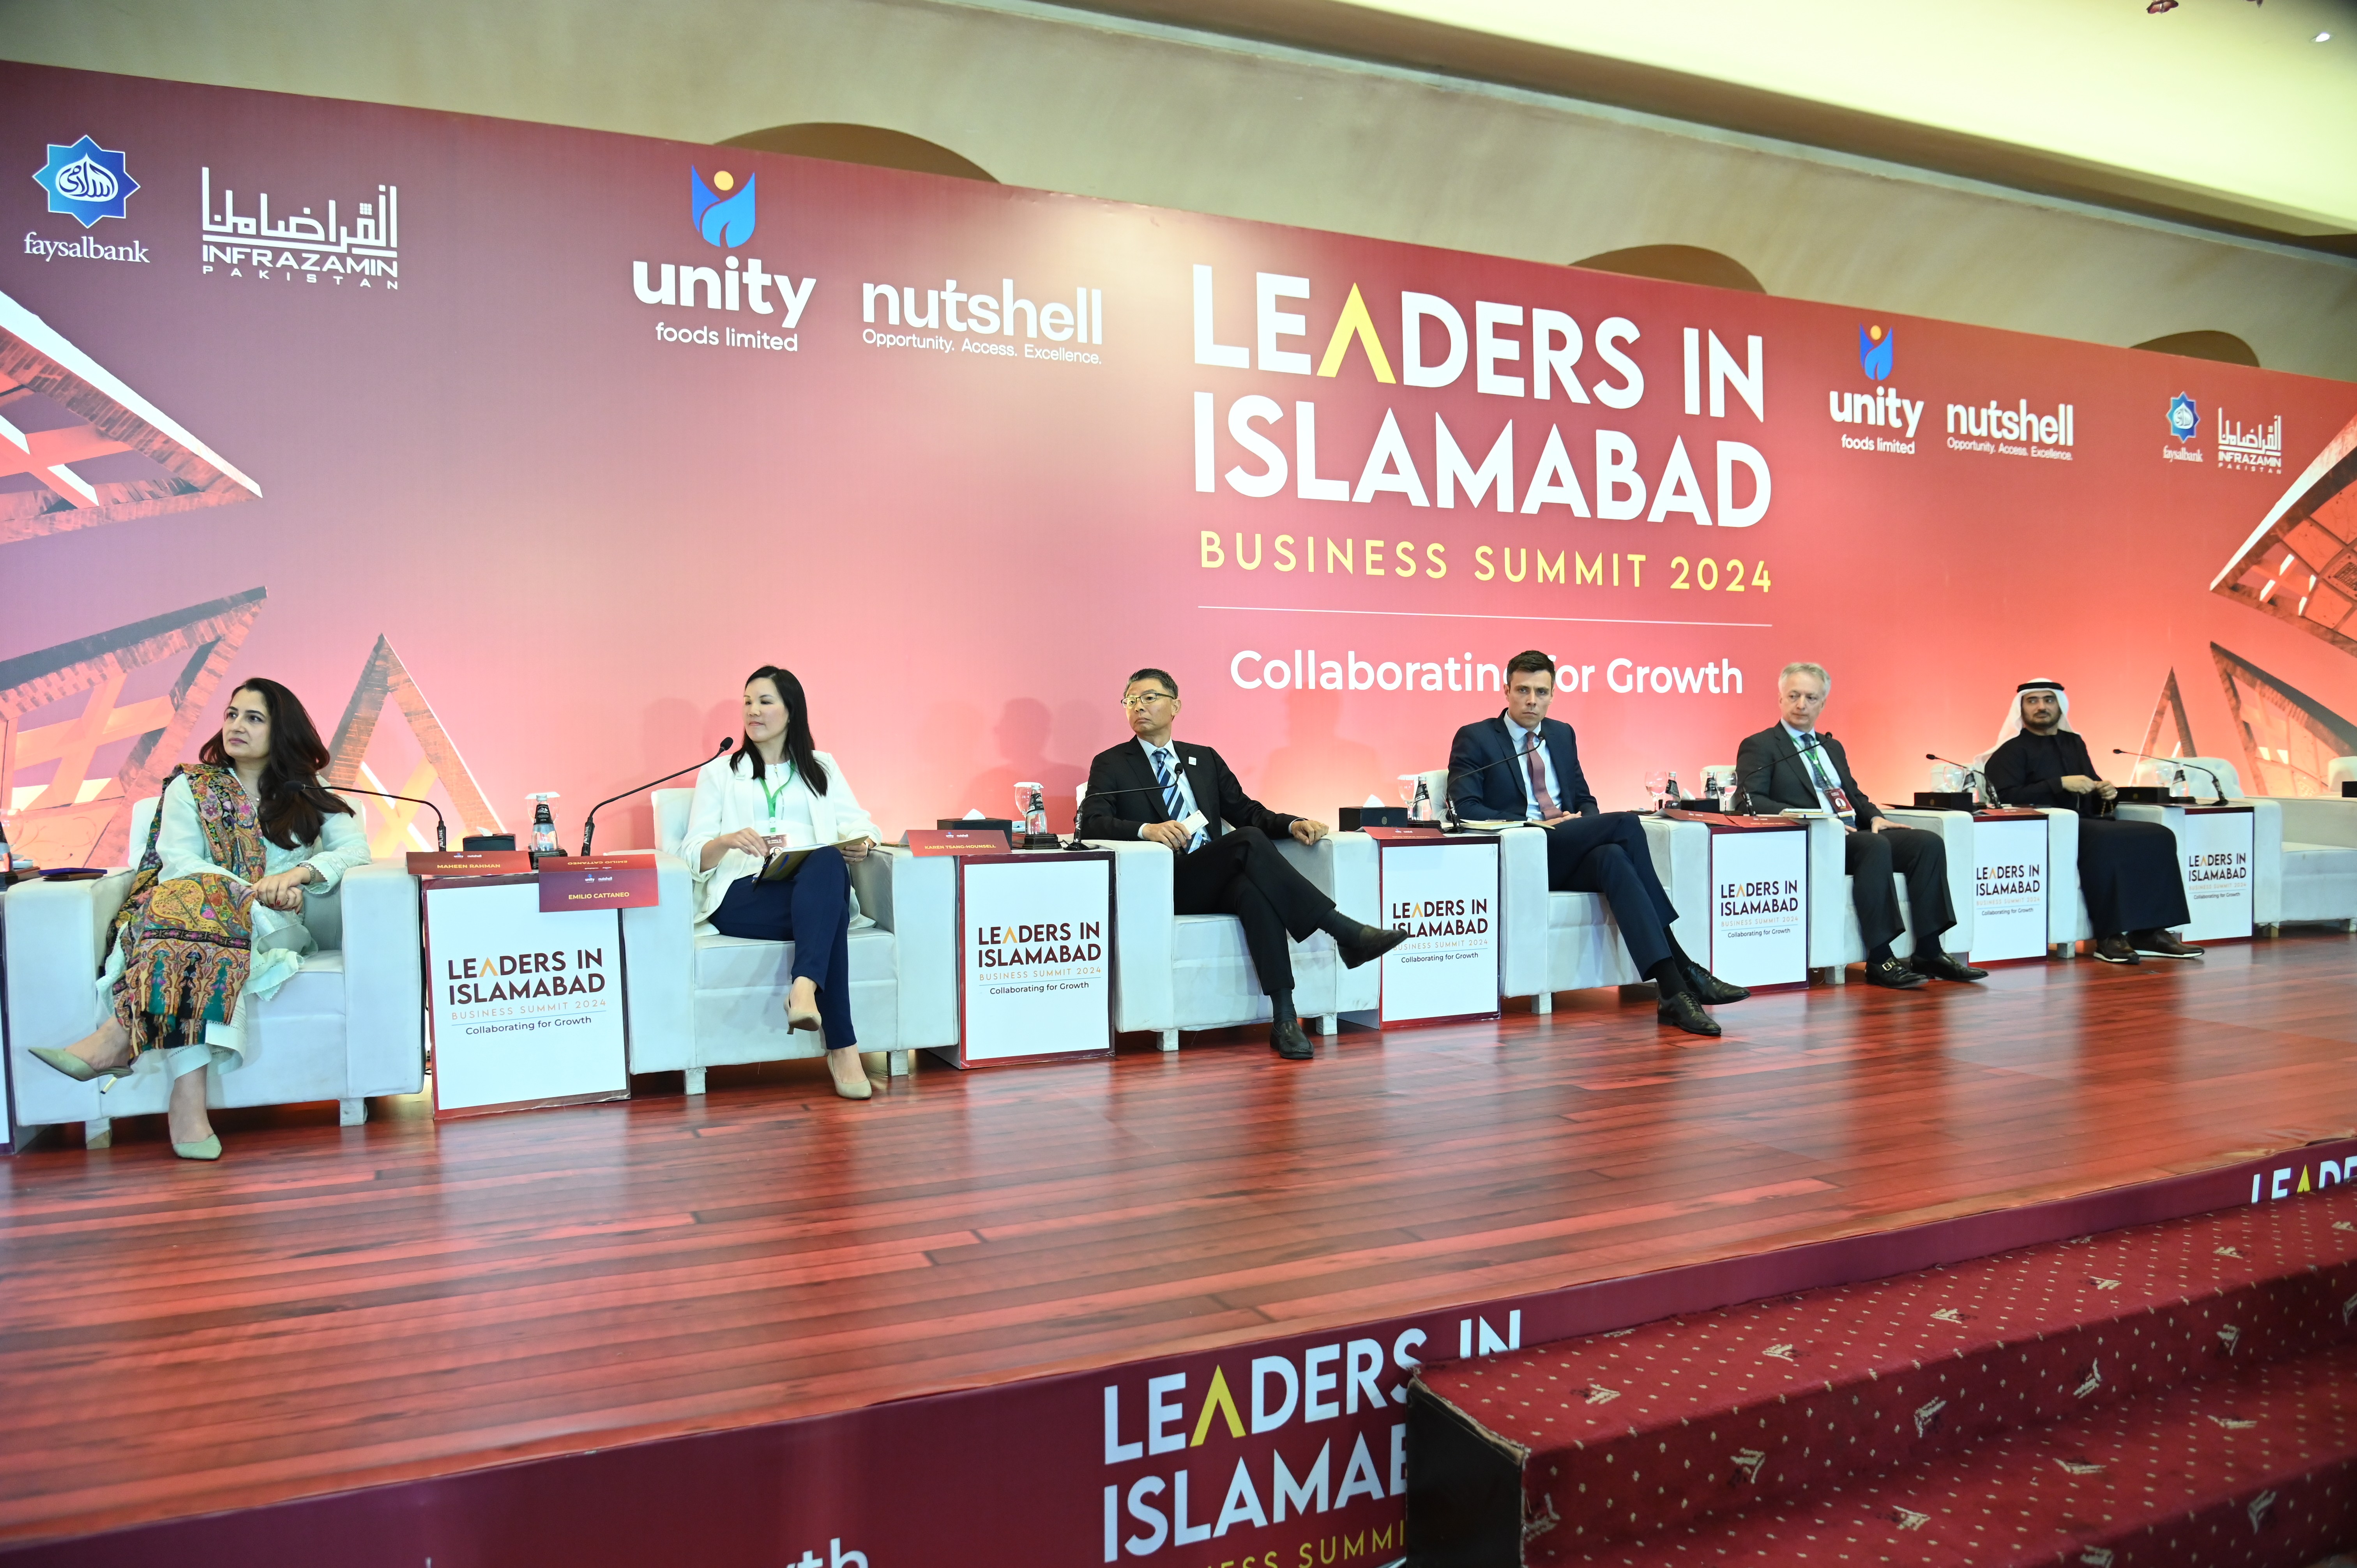 The speakers in an event of Leaders in Islamabad, a business summit 2024